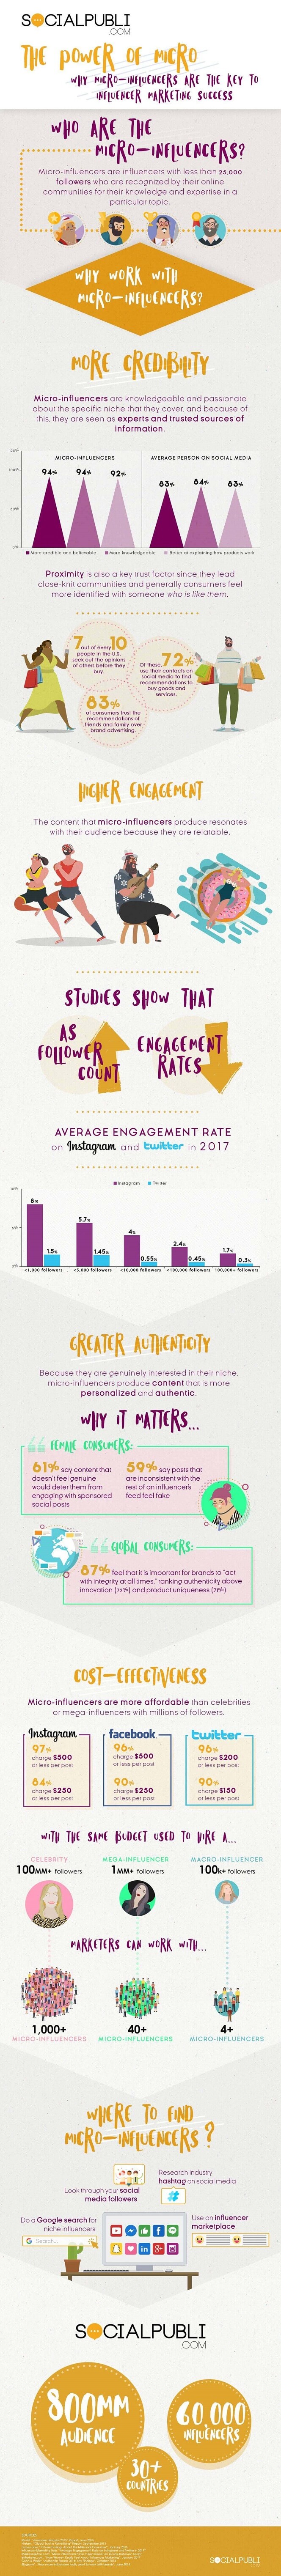 The Power of Micro-Influencer Infographic